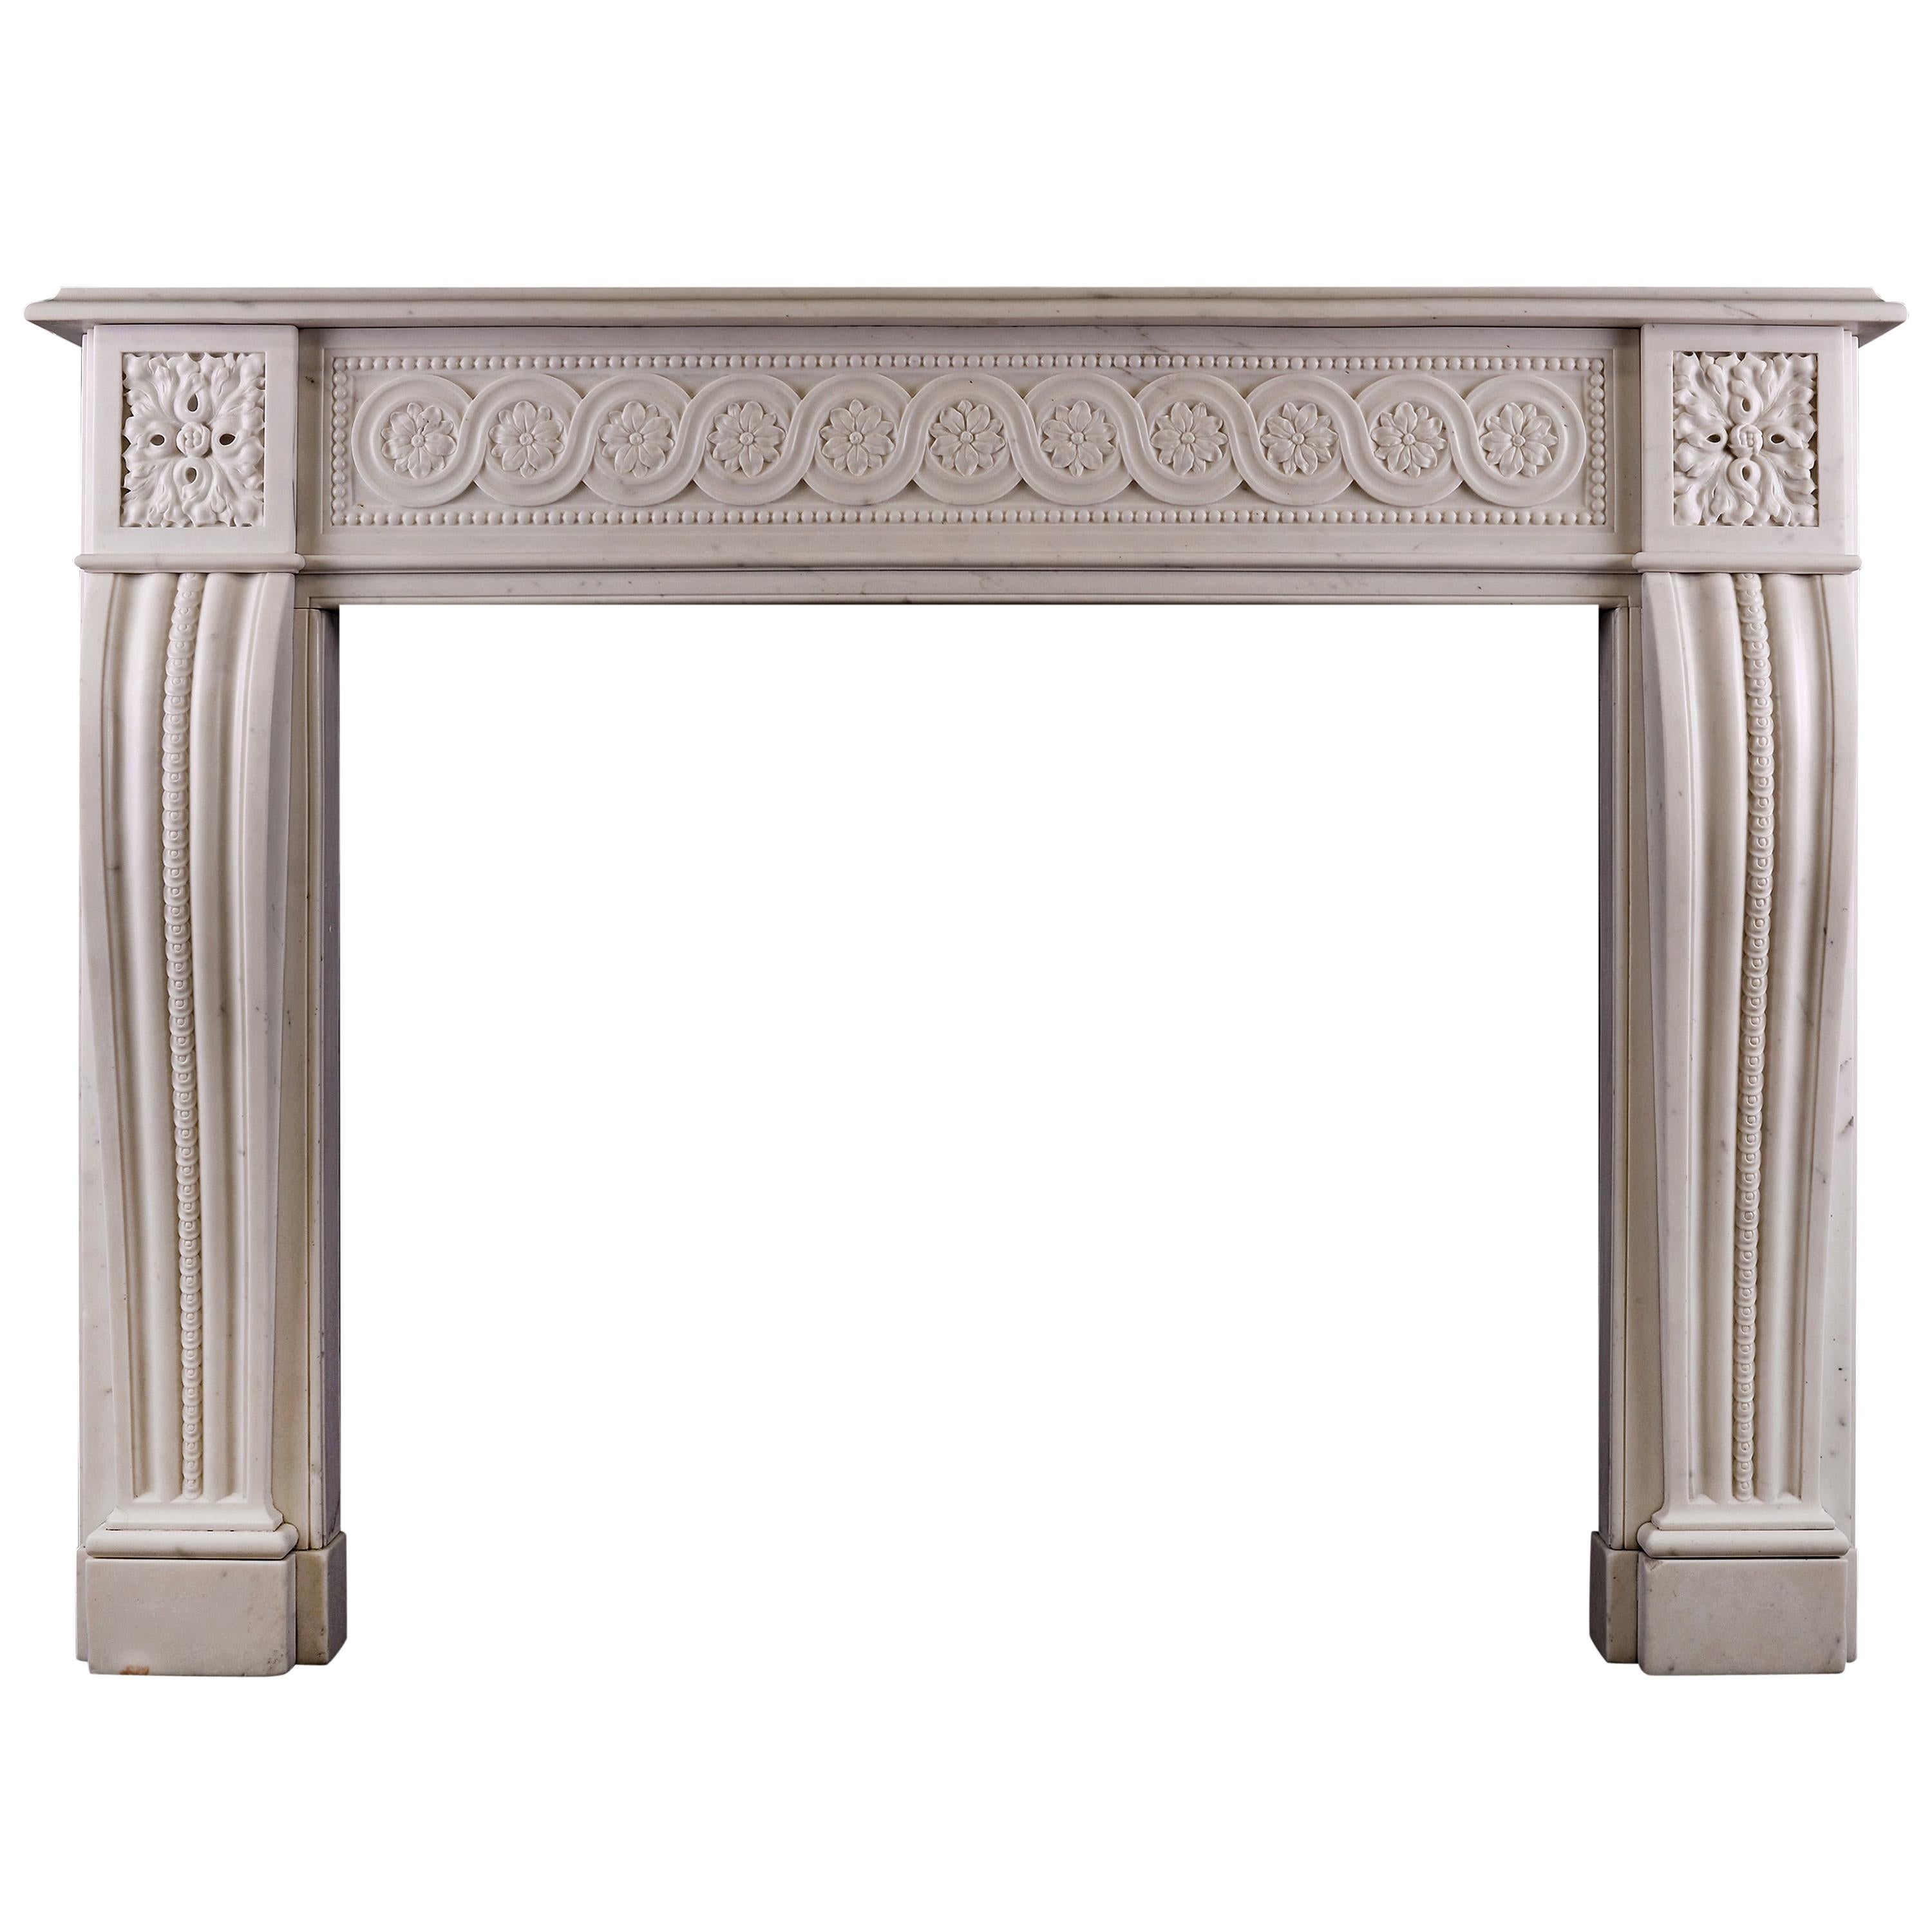 Carved Statuary Marble Fireplace